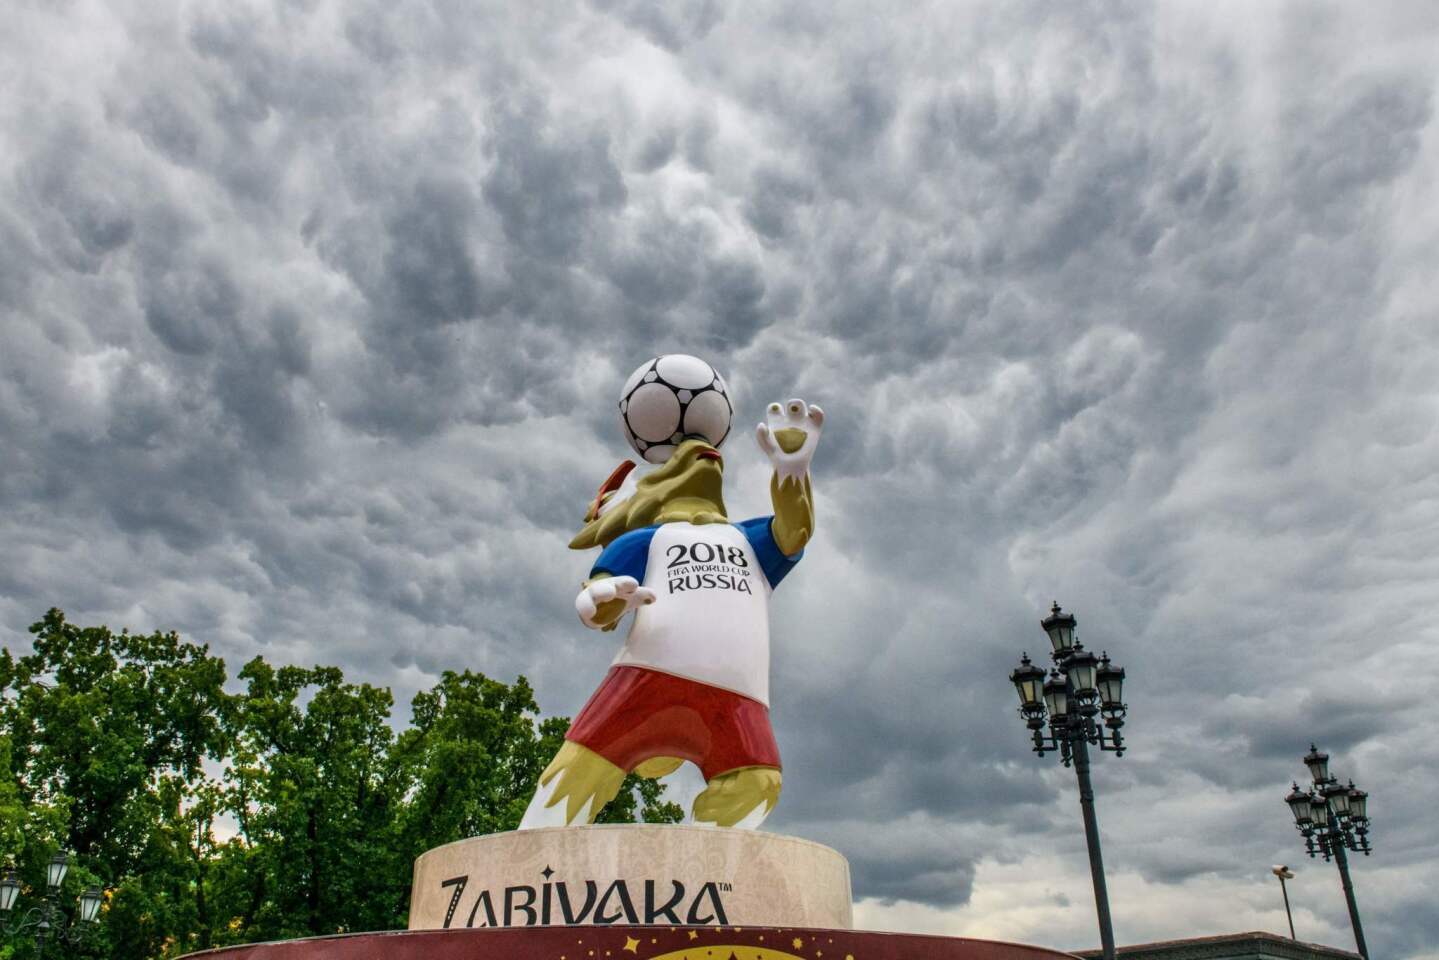 A statue of Zabivaka, the official mascot for the 2018 FIFA World Cup, is seen on Manezhnaya Square in downtown Moscow on June 7, 2018.